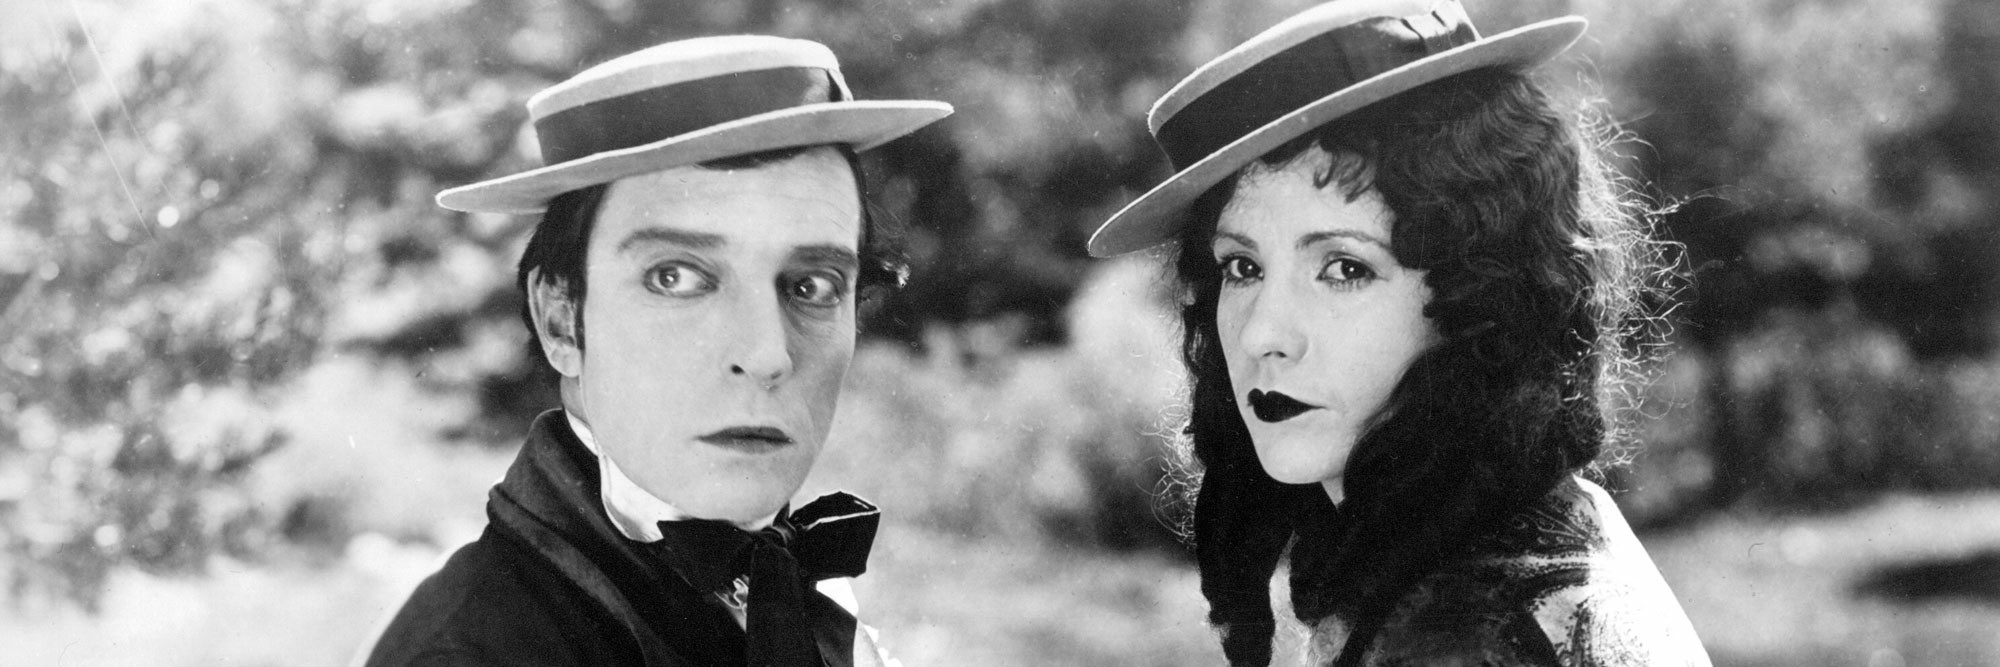 MoMA Presents: Buster Keaton's Our Hospitality